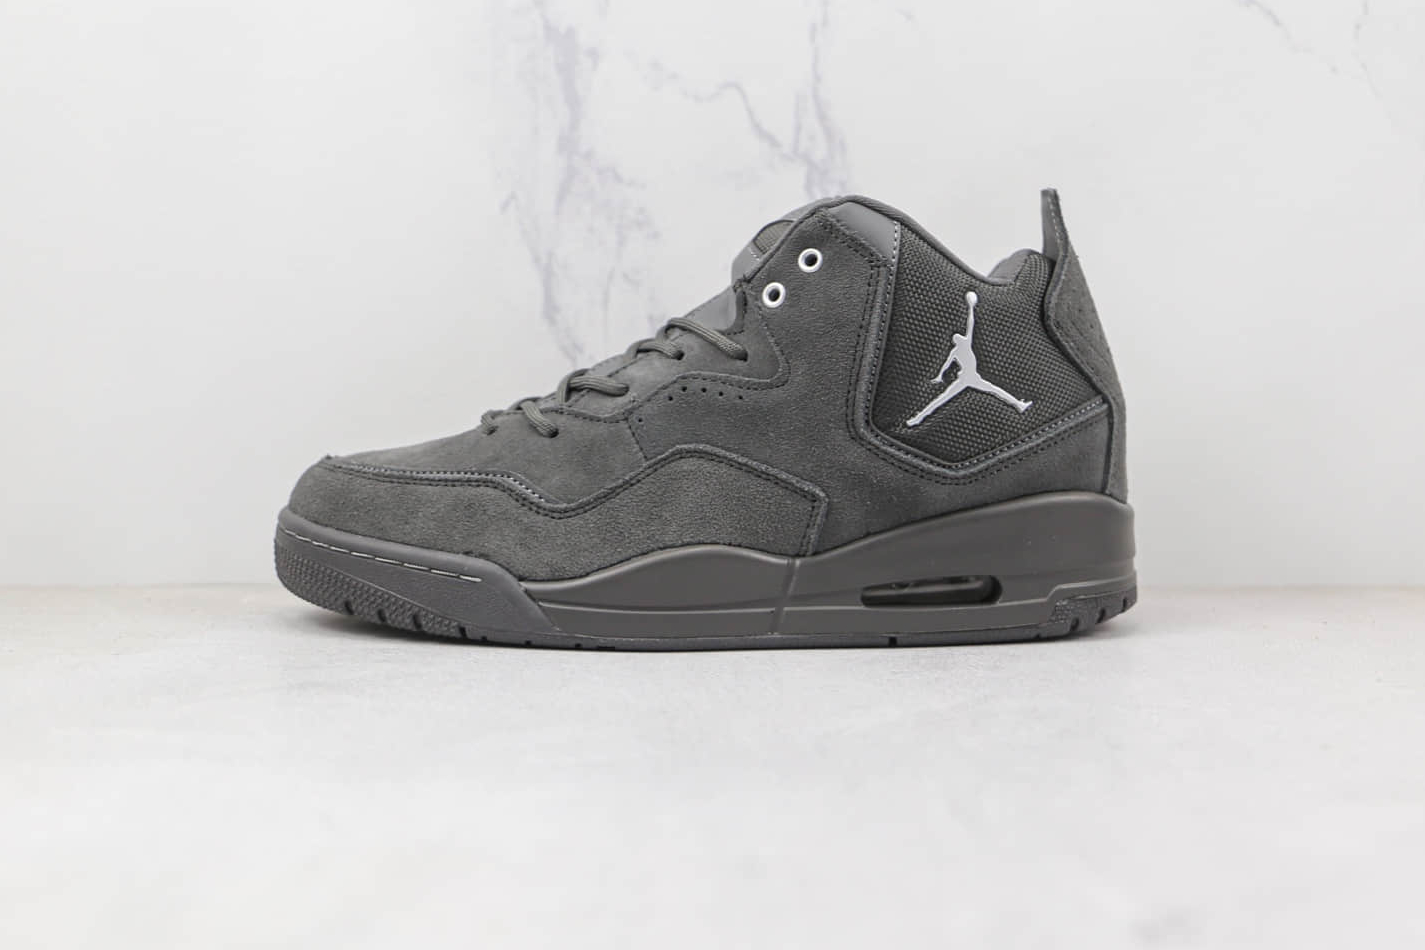 Air Jordan Courtside 23 Cool Grey Wolf Grey White - Buy Now at the Best Price!